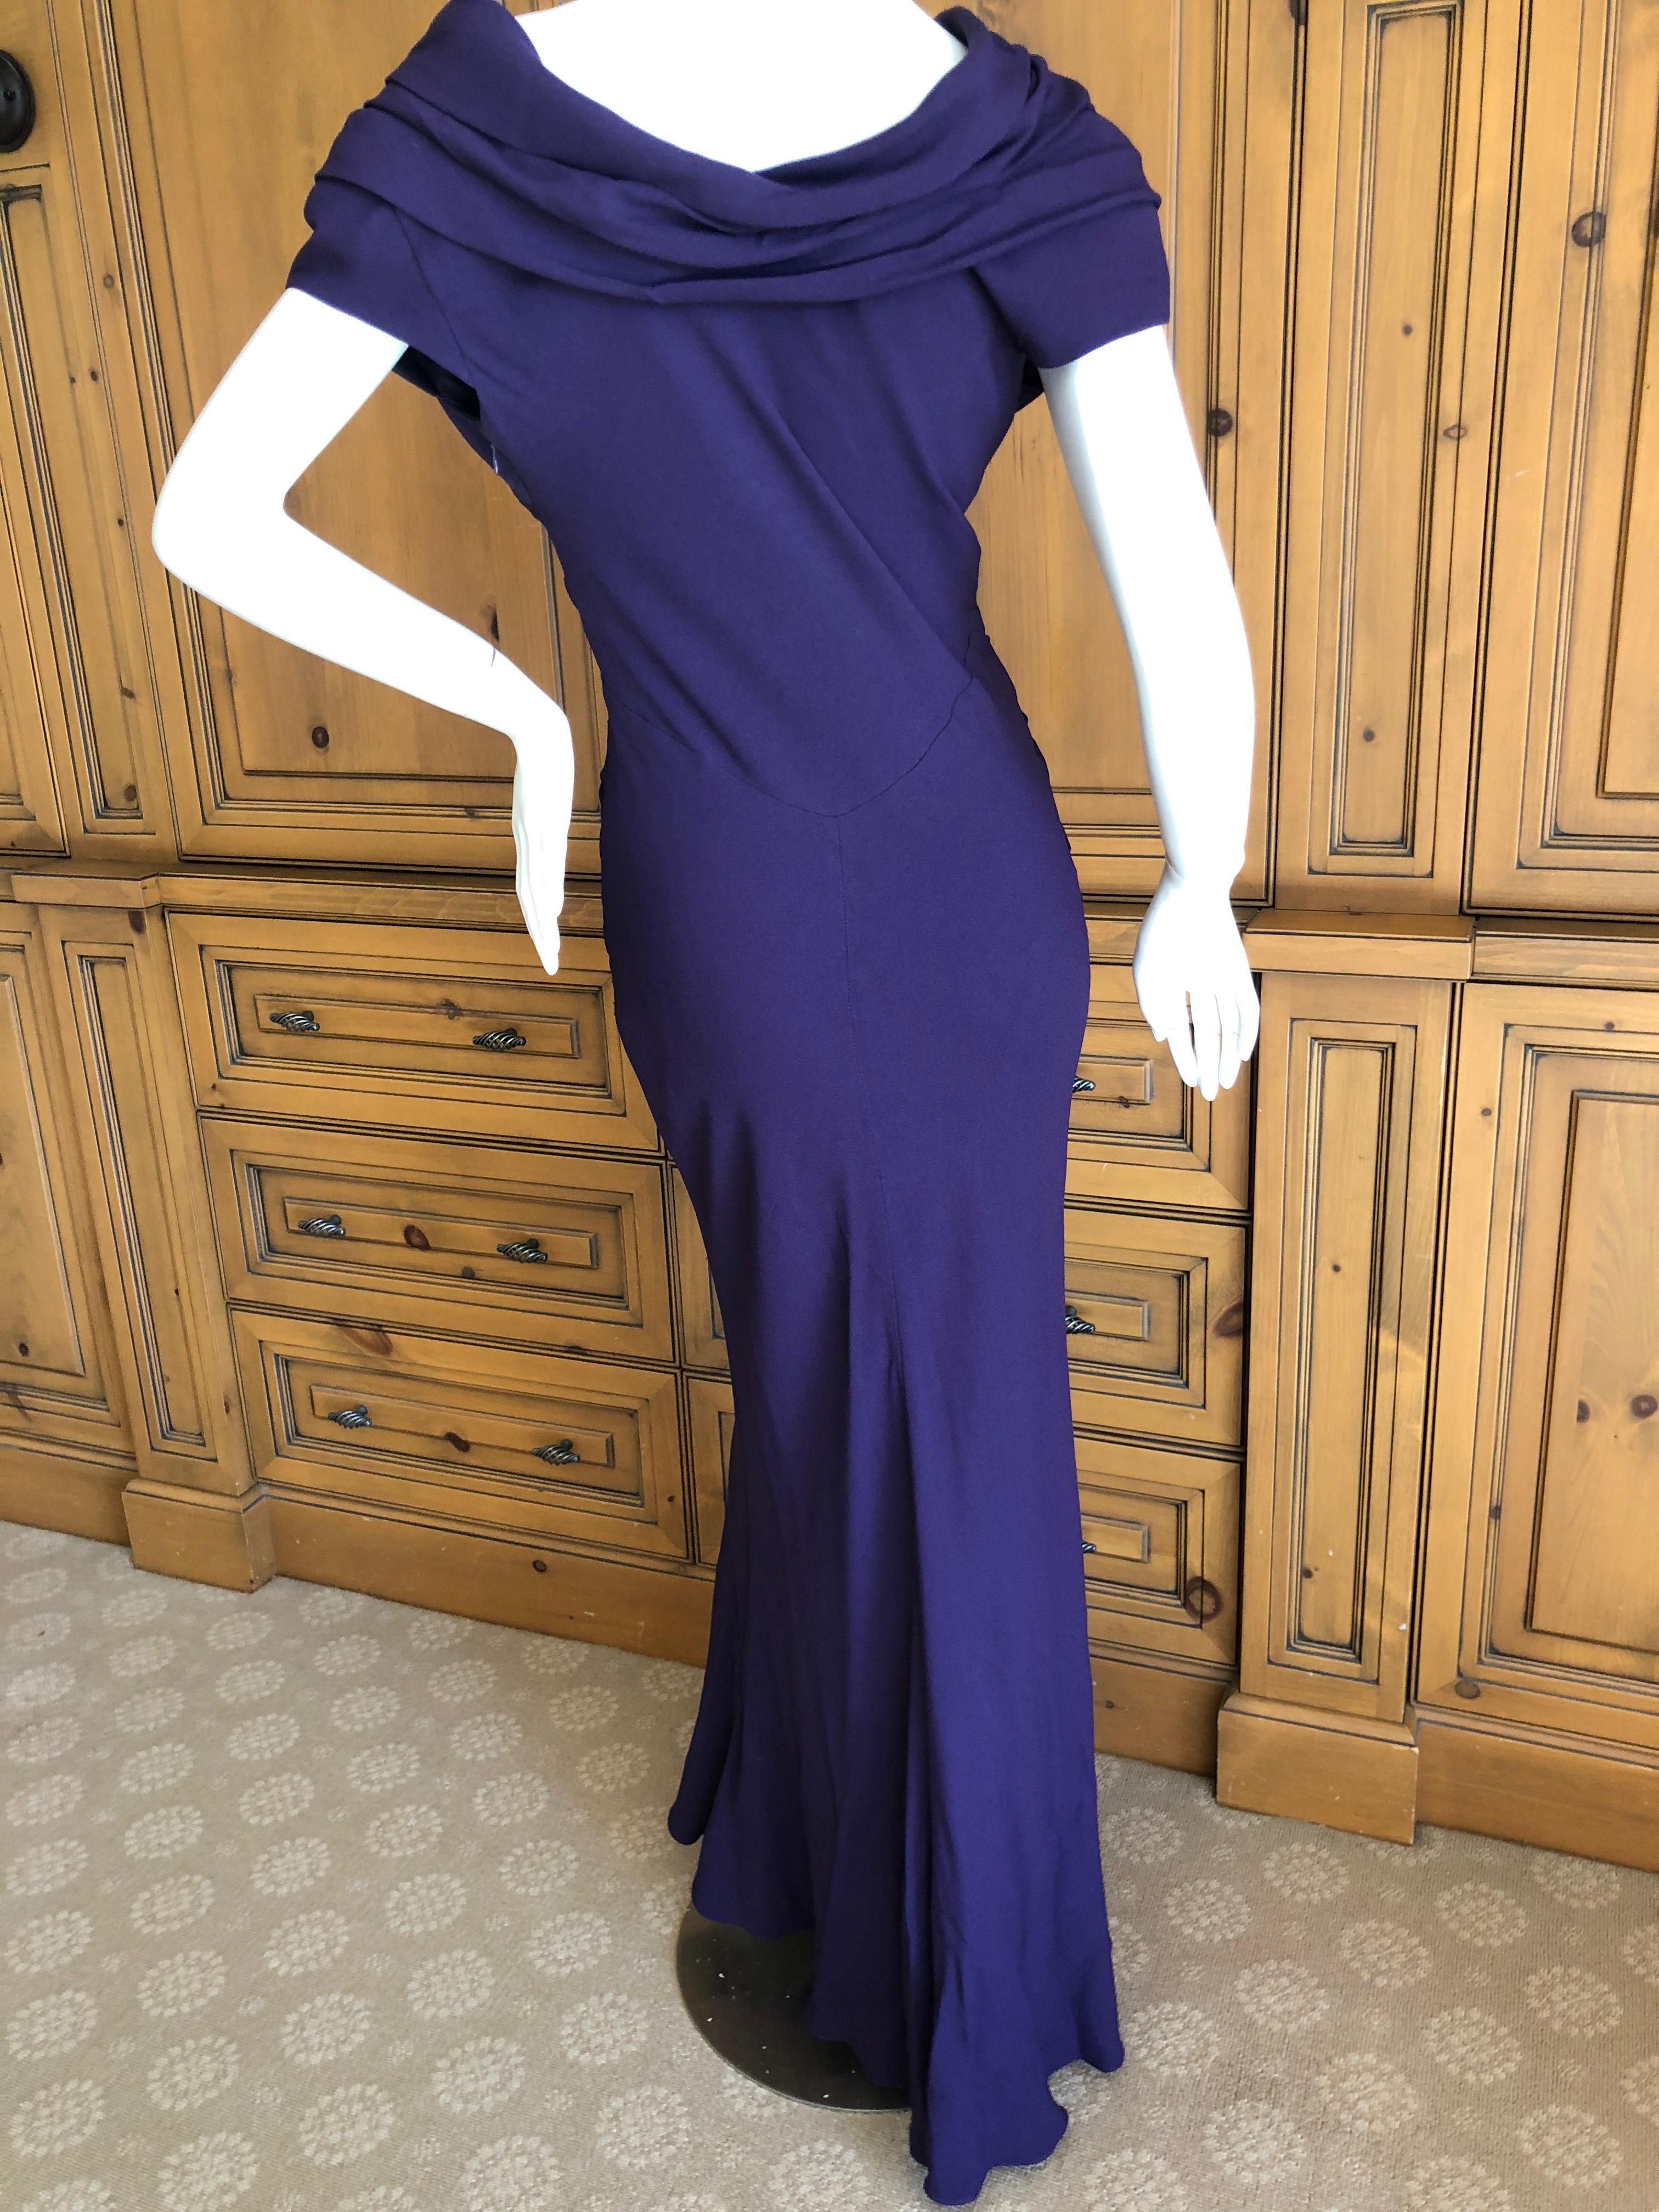 Christian Dior by John Galliano Purple Vintage Silk Lined Evening Dress w Shawl For Sale 2